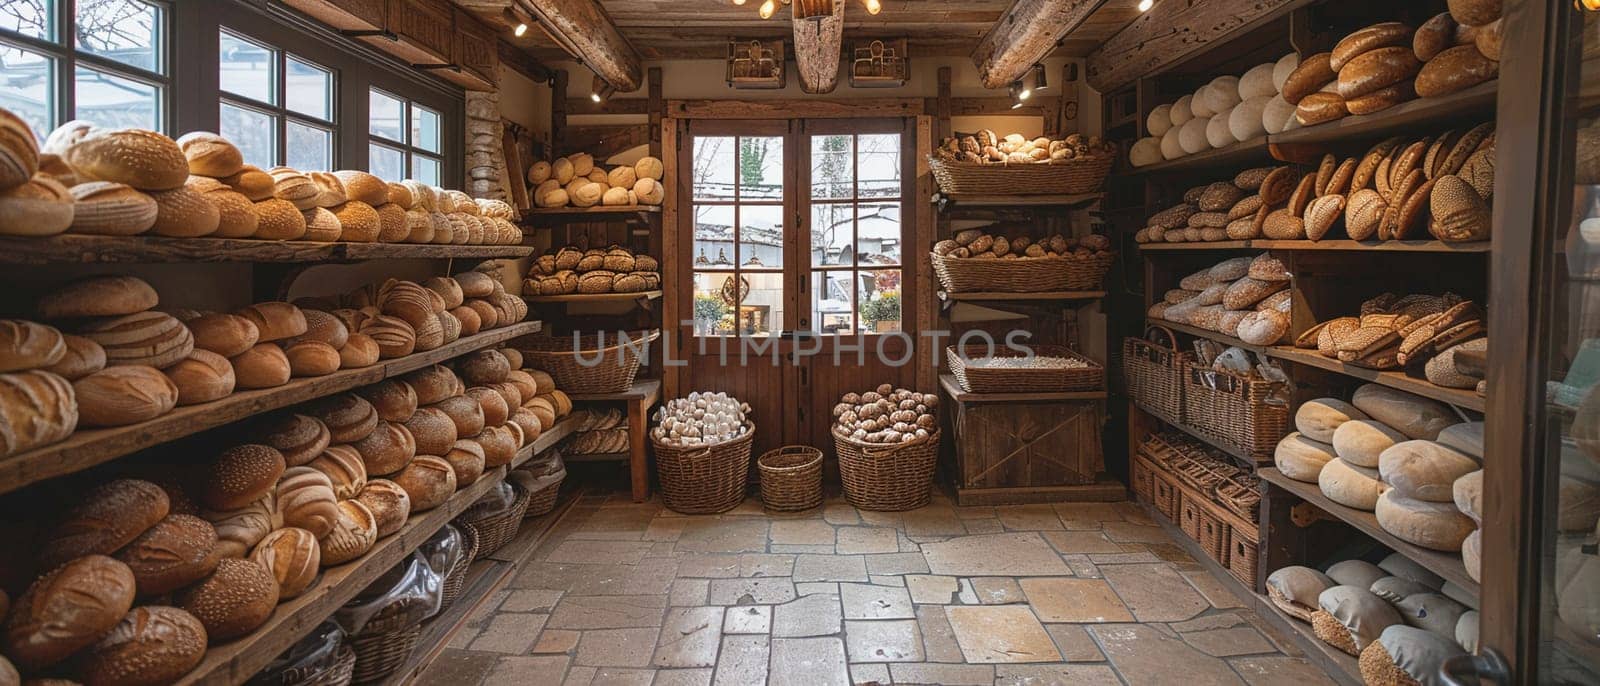 Rustic Bakery Hearth Shares Warmth in Business of Comfort Food and Artisan Loaves by Benzoix